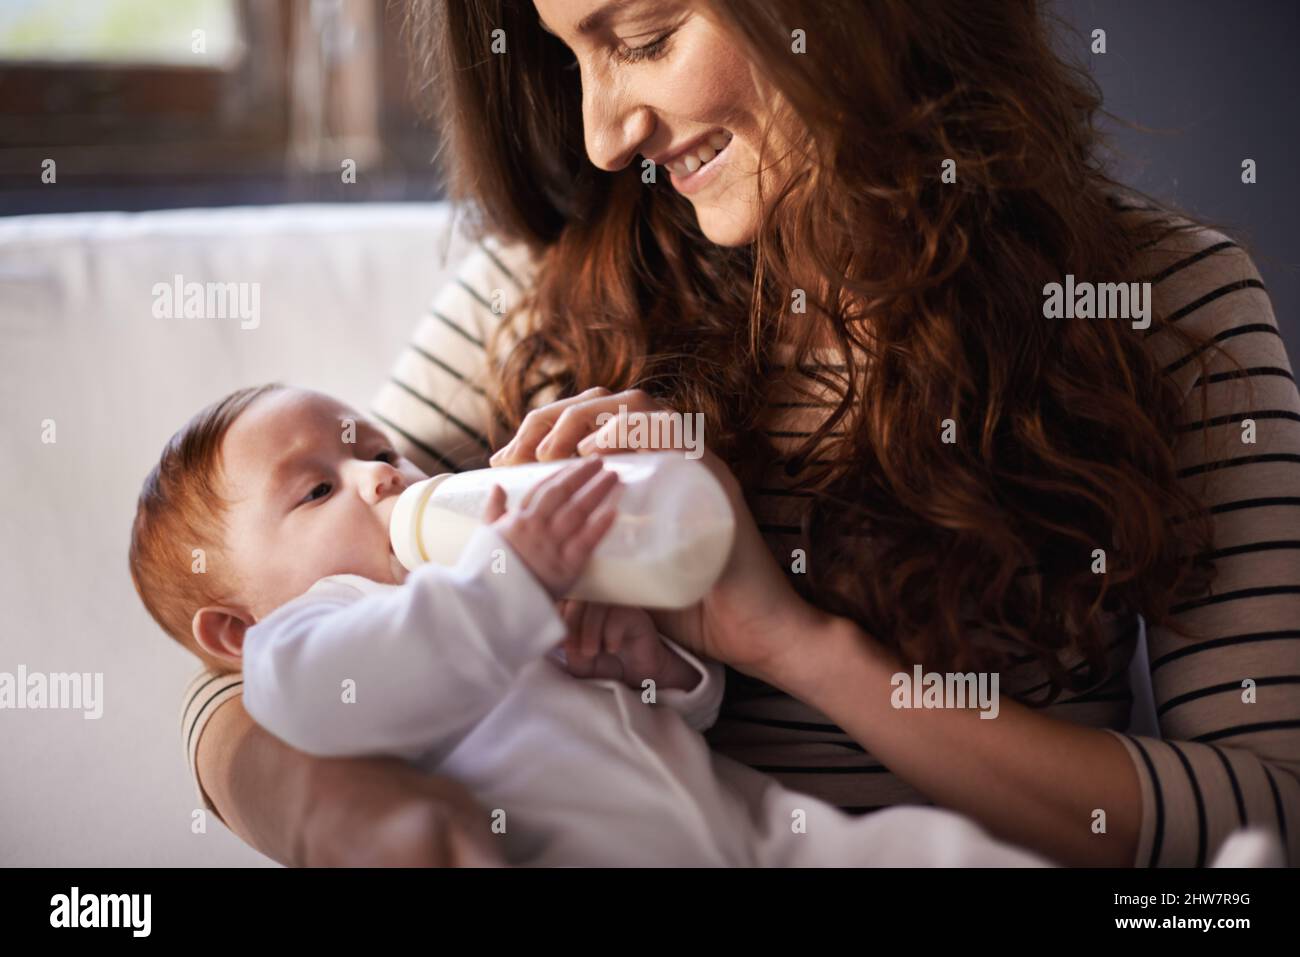 Yummy for her tummy. Cropped shot of an adoring mother feeding her baby. Stock Photo